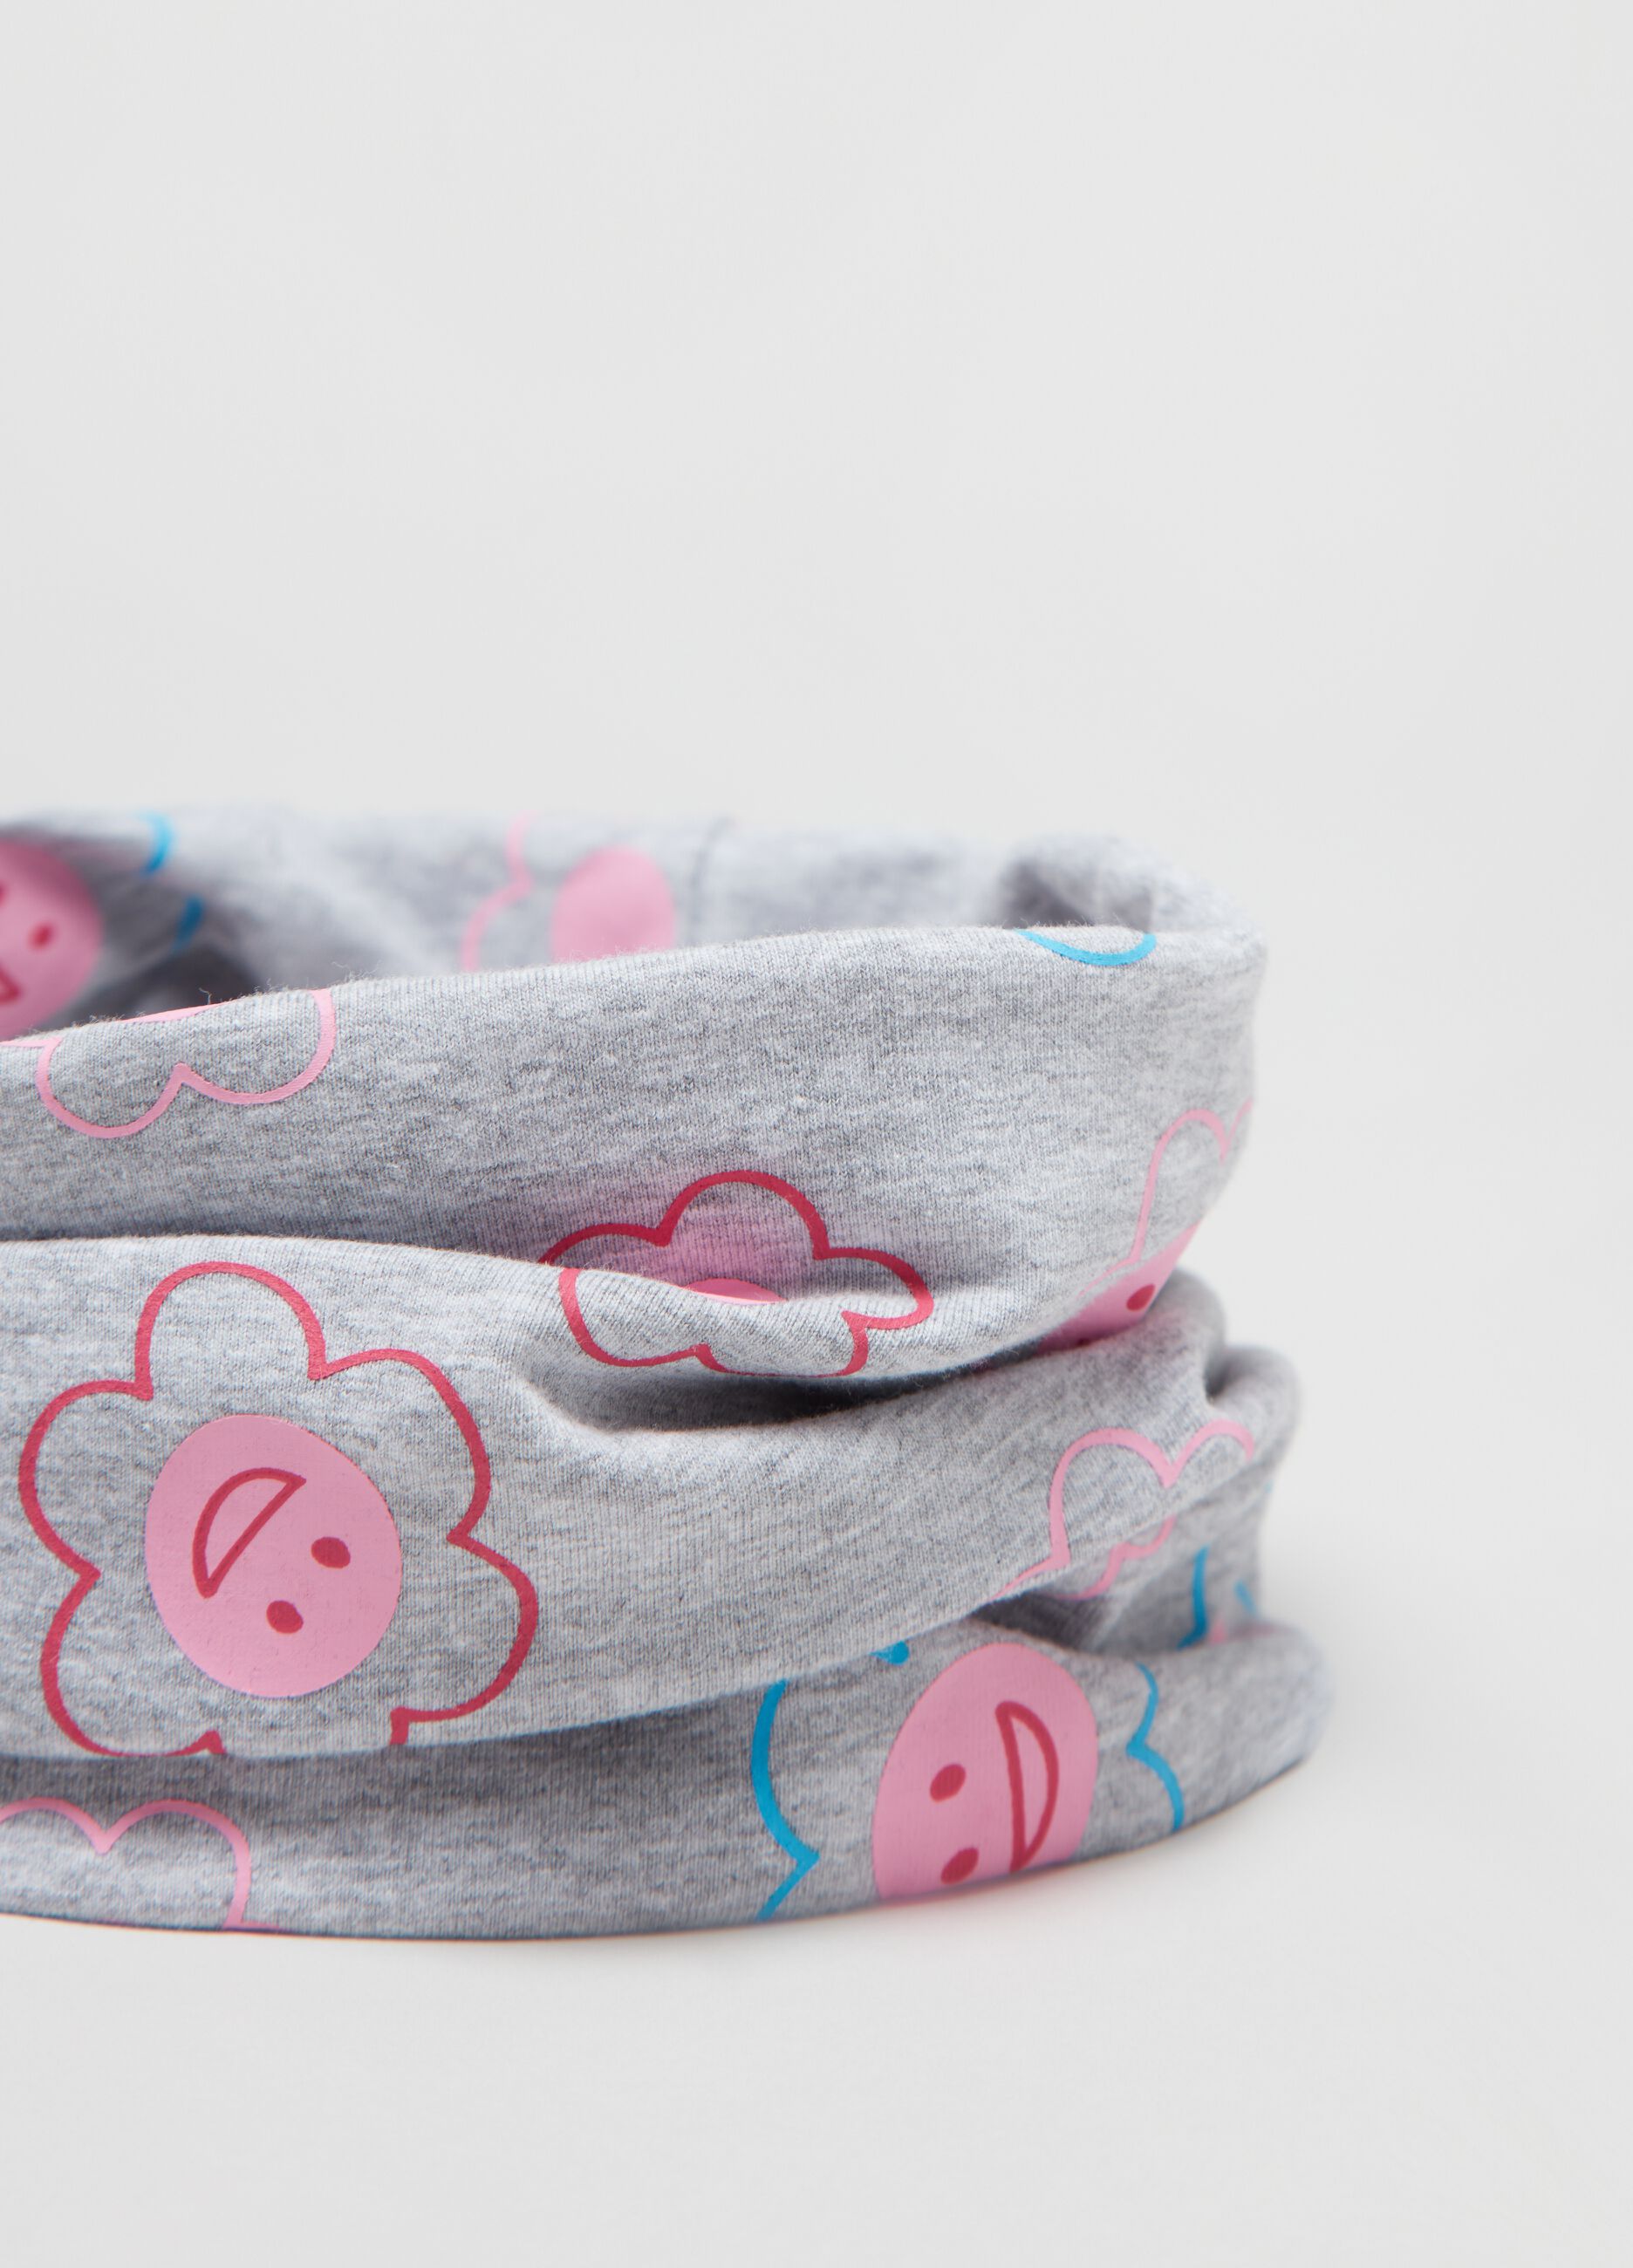 Jersey neck warmer with daisy print.